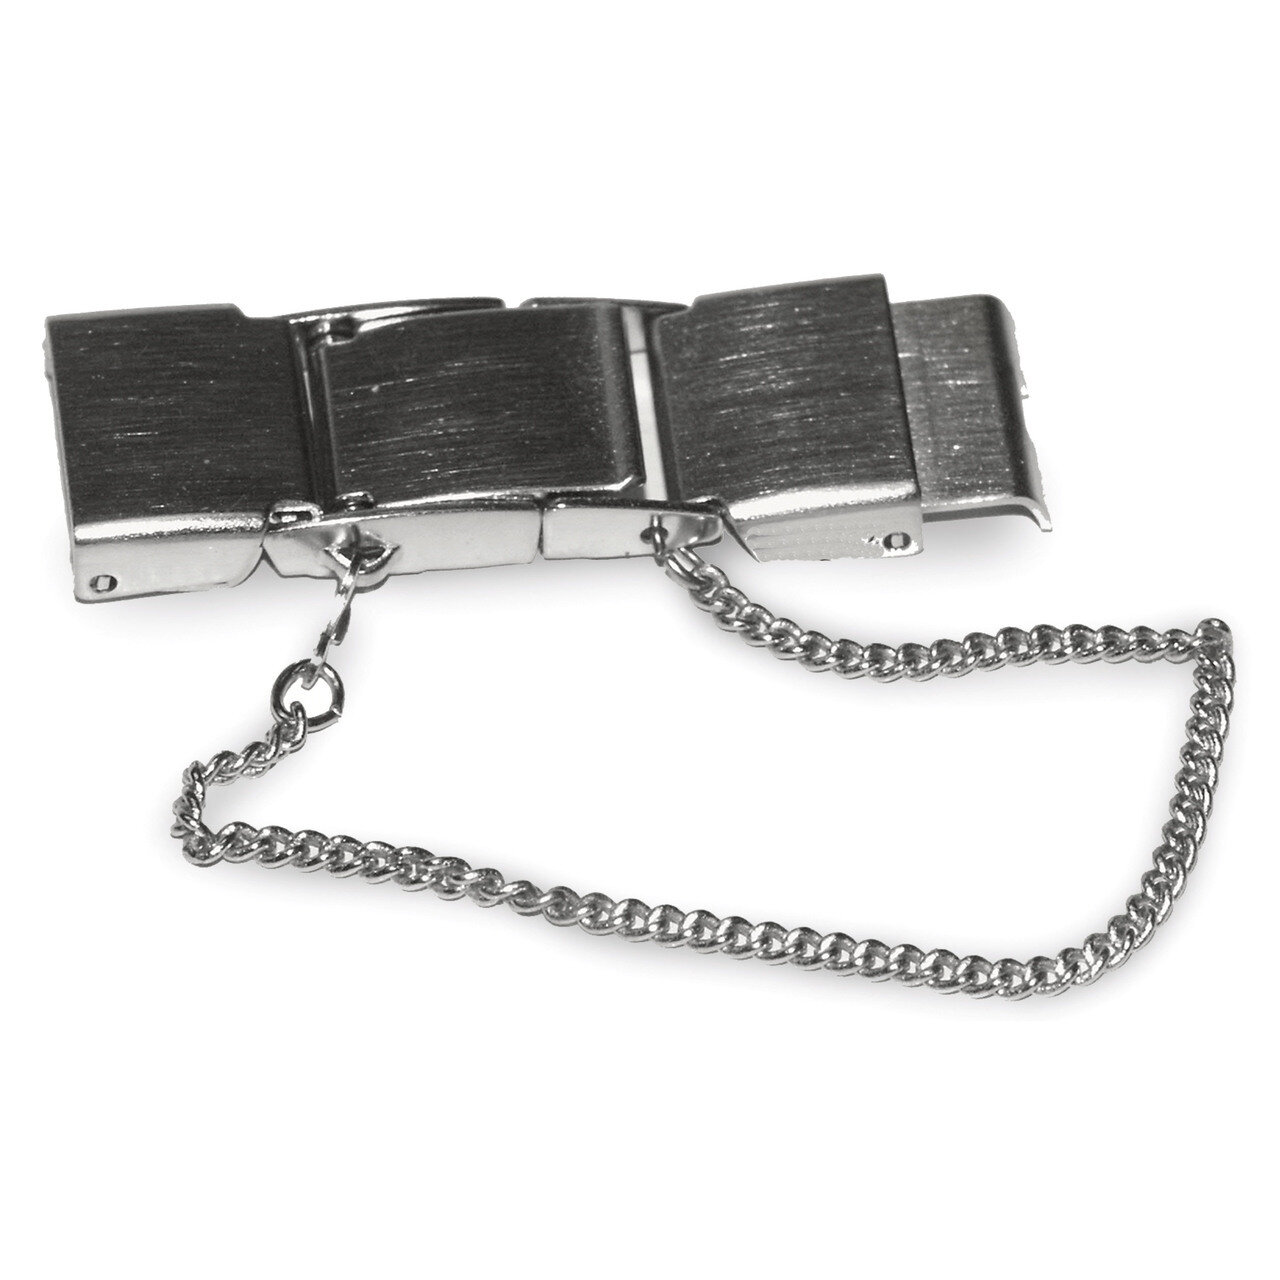 6mm Seiko-Style with Safety Chain Stainless Steel Clasp 6 Inch FTL135W-6